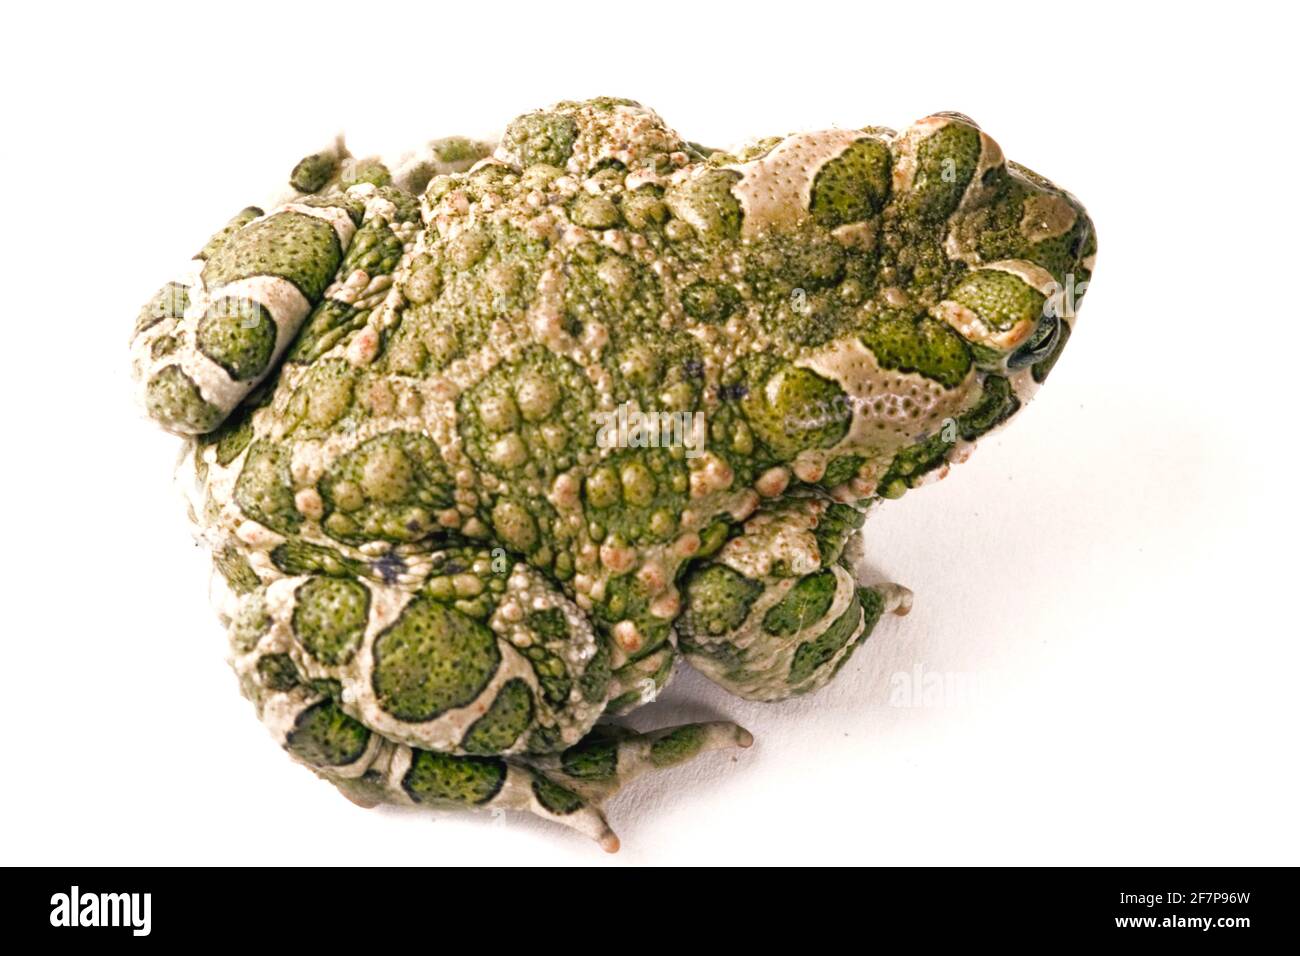 Green toad, Variegated toad (Bufo viridis), top view, cut-out